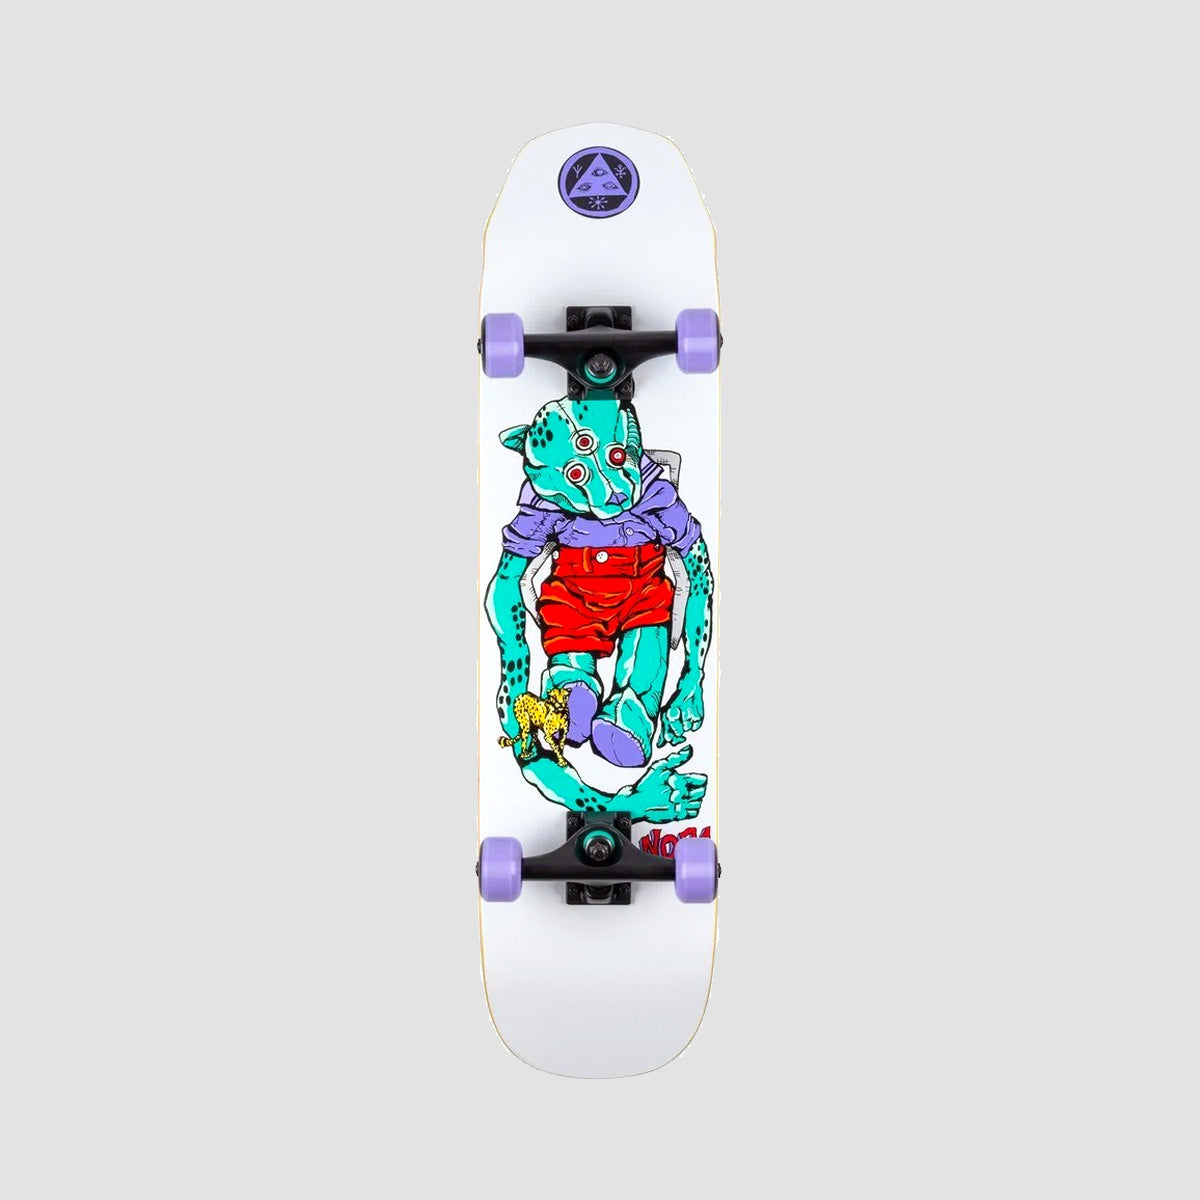 Welcome Teddy Skateboard on Scaled Down Wicked Princess White - 7.75"